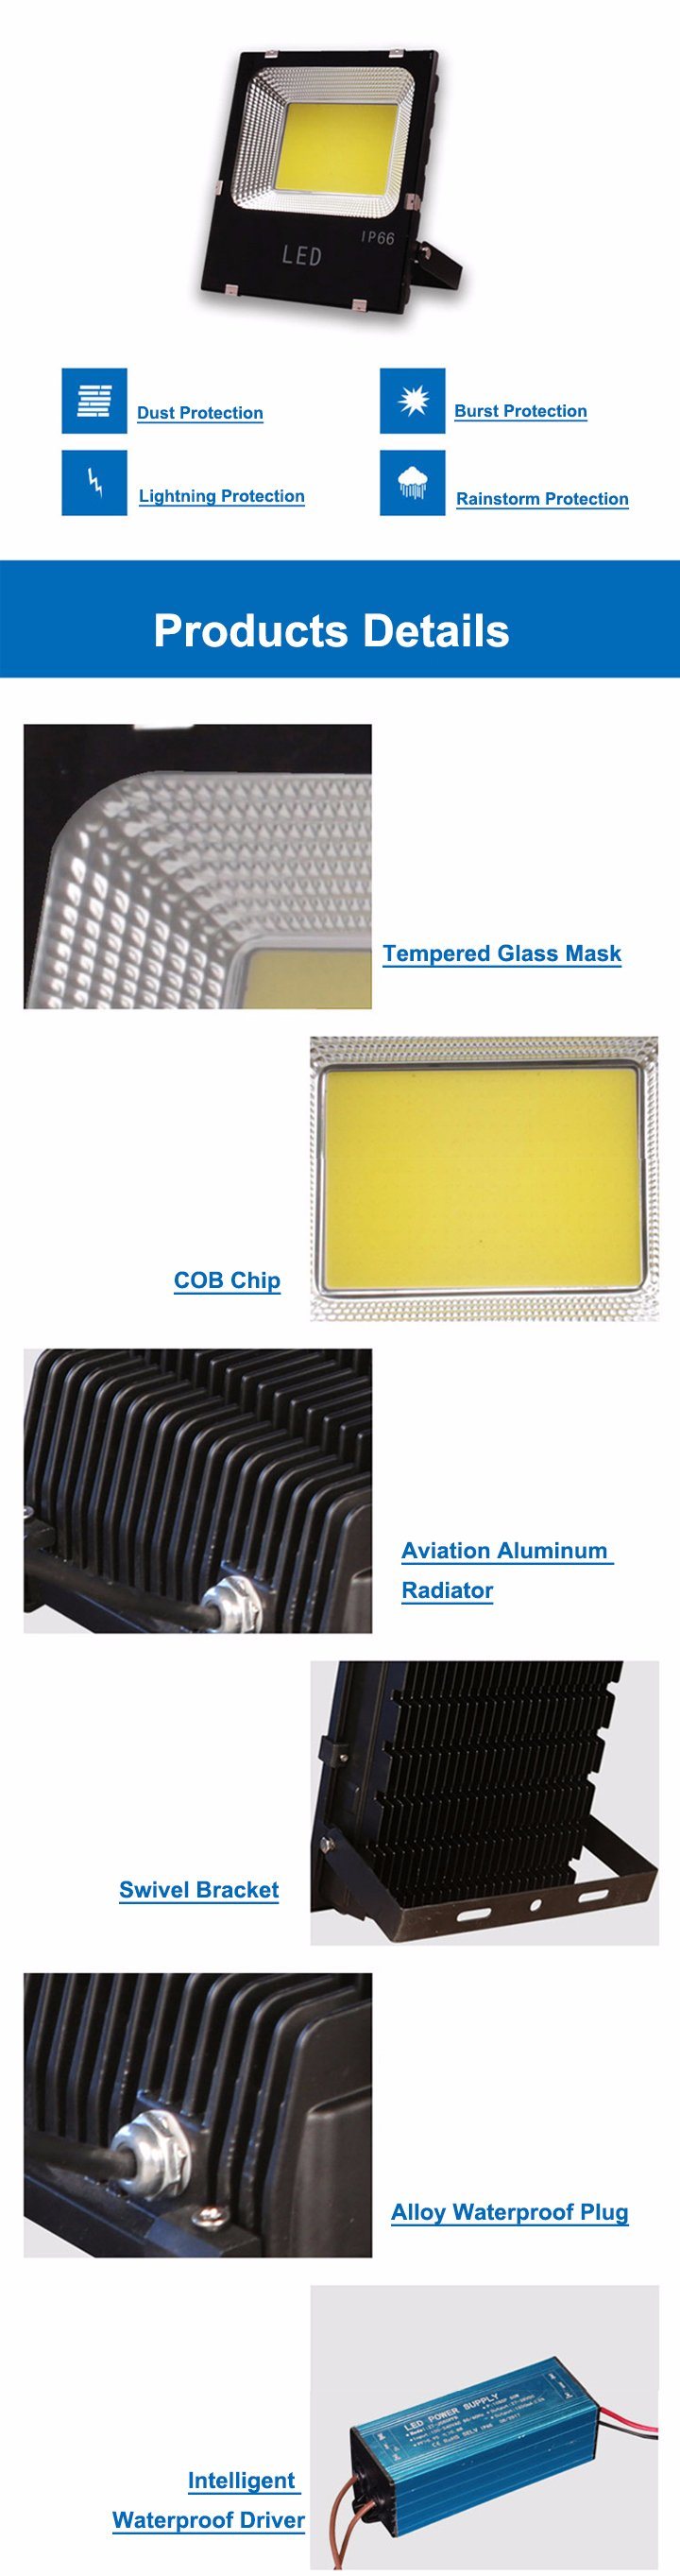 SMD LED Floodlight with Small Size